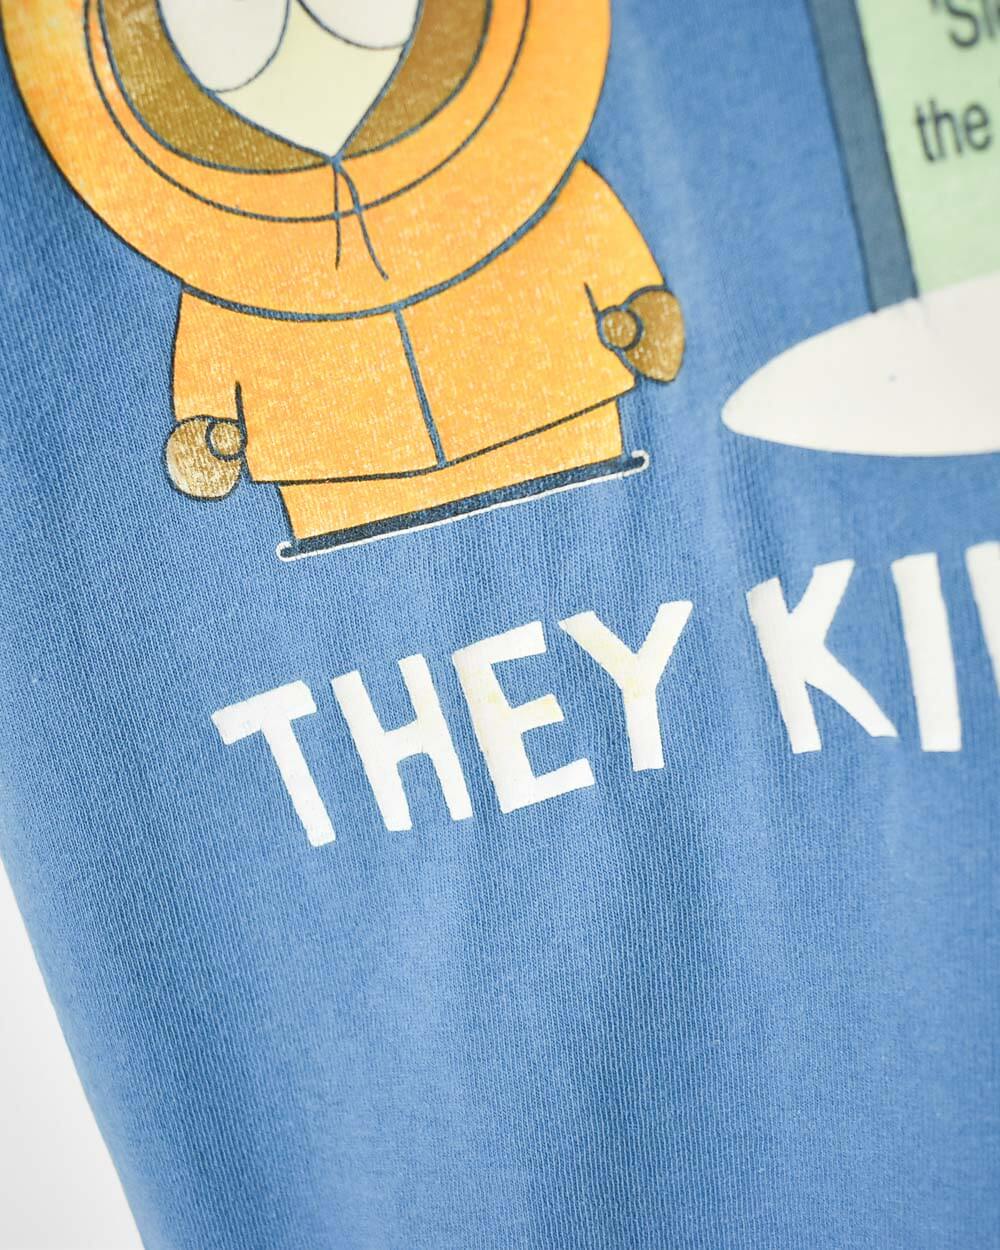 Blue South Park They Killed Kenny T-Shirt - Small